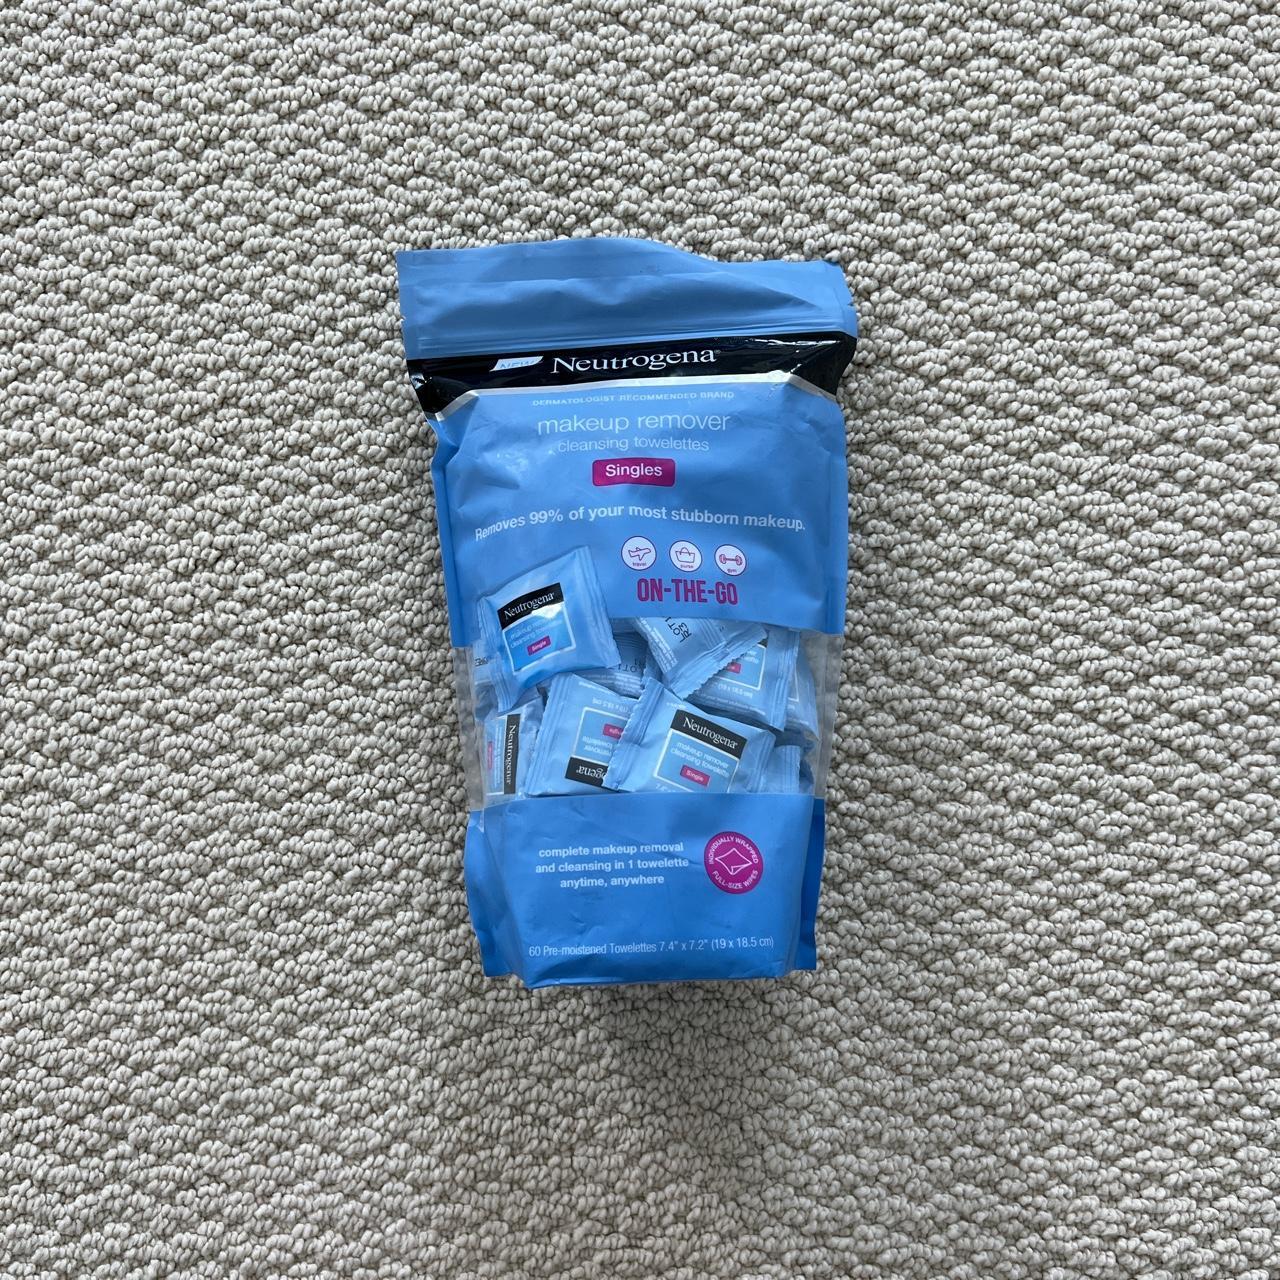 Product Image 1 - NEUTROGENA
makeup remover singles
one size